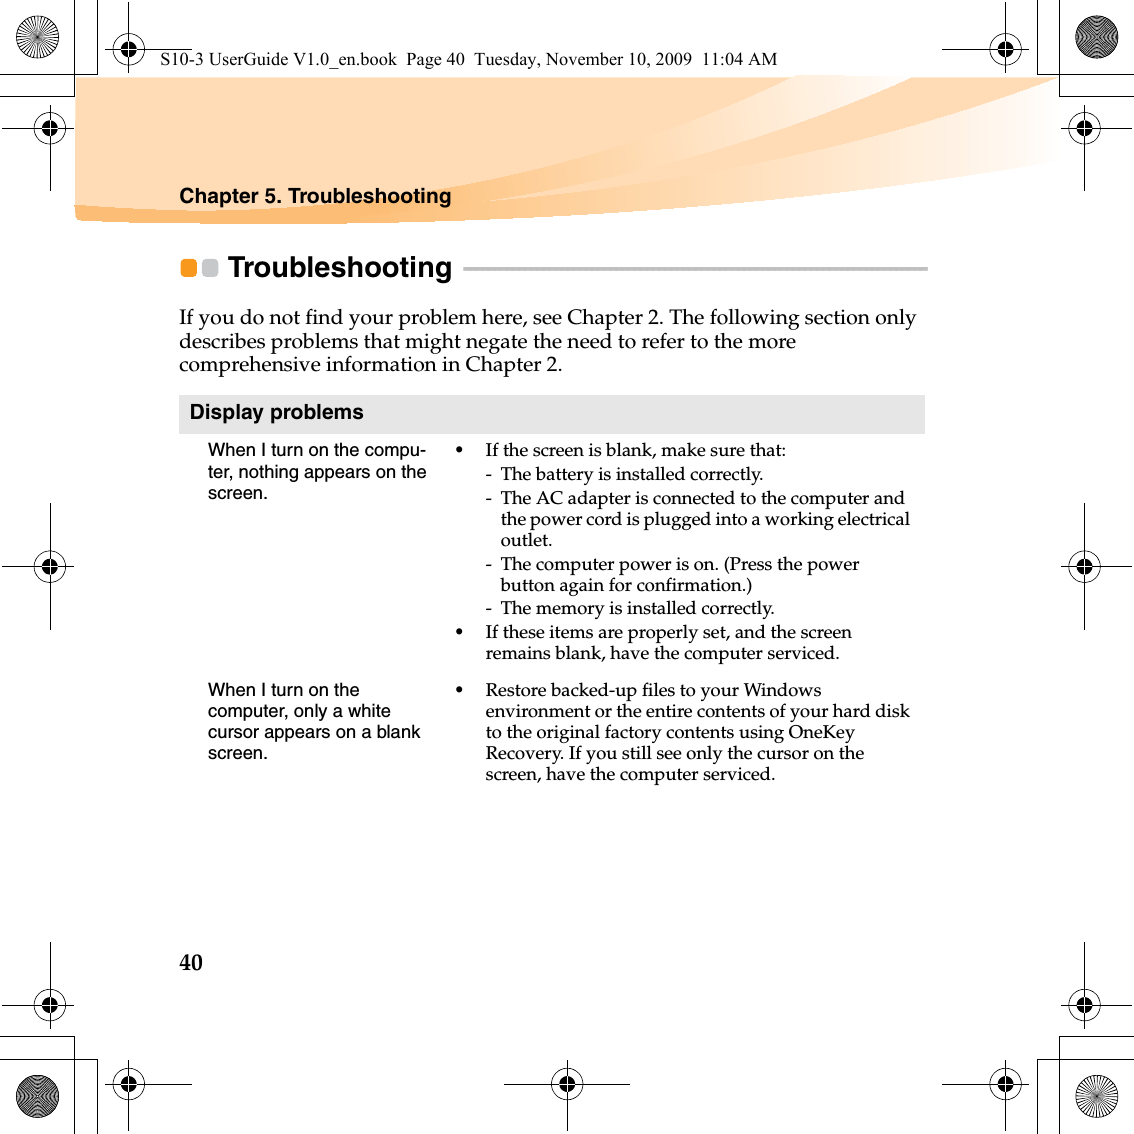 40Chapter 5. TroubleshootingTroubleshooting  - - - - - - - - - - - - - - - - - - - - - - - - - - - - - - - - - - - - - - - - - - - - - - - - - - - - - - - - - - - - - - - - - - - - - - - - - - - - If you do not find your problem here, see Chapter 2. The following section only describes problems that might negate the need to refer to the more comprehensive information in Chapter 2.Display problemsWhen I turn on the compu-ter, nothing appears on the screen.•If the screen is blank, make sure that:- The battery is installed correctly. - The AC adapter is connected to the computer and the power cord is plugged into a working electrical outlet.- The computer power is on. (Press the power button again for confirmation.)- The memory is installed correctly. •If these items are properly set, and the screen remains blank, have the computer serviced. When I turn on the computer, only a white cursor appears on a blank screen. •Restore backed-up files to your Windows environment or the entire contents of your hard disk to the original factory contents using OneKey Recovery. If you still see only the cursor on the screen, have the computer serviced.S10-3 UserGuide V1.0_en.book  Page 40  Tuesday, November 10, 2009  11:04 AM